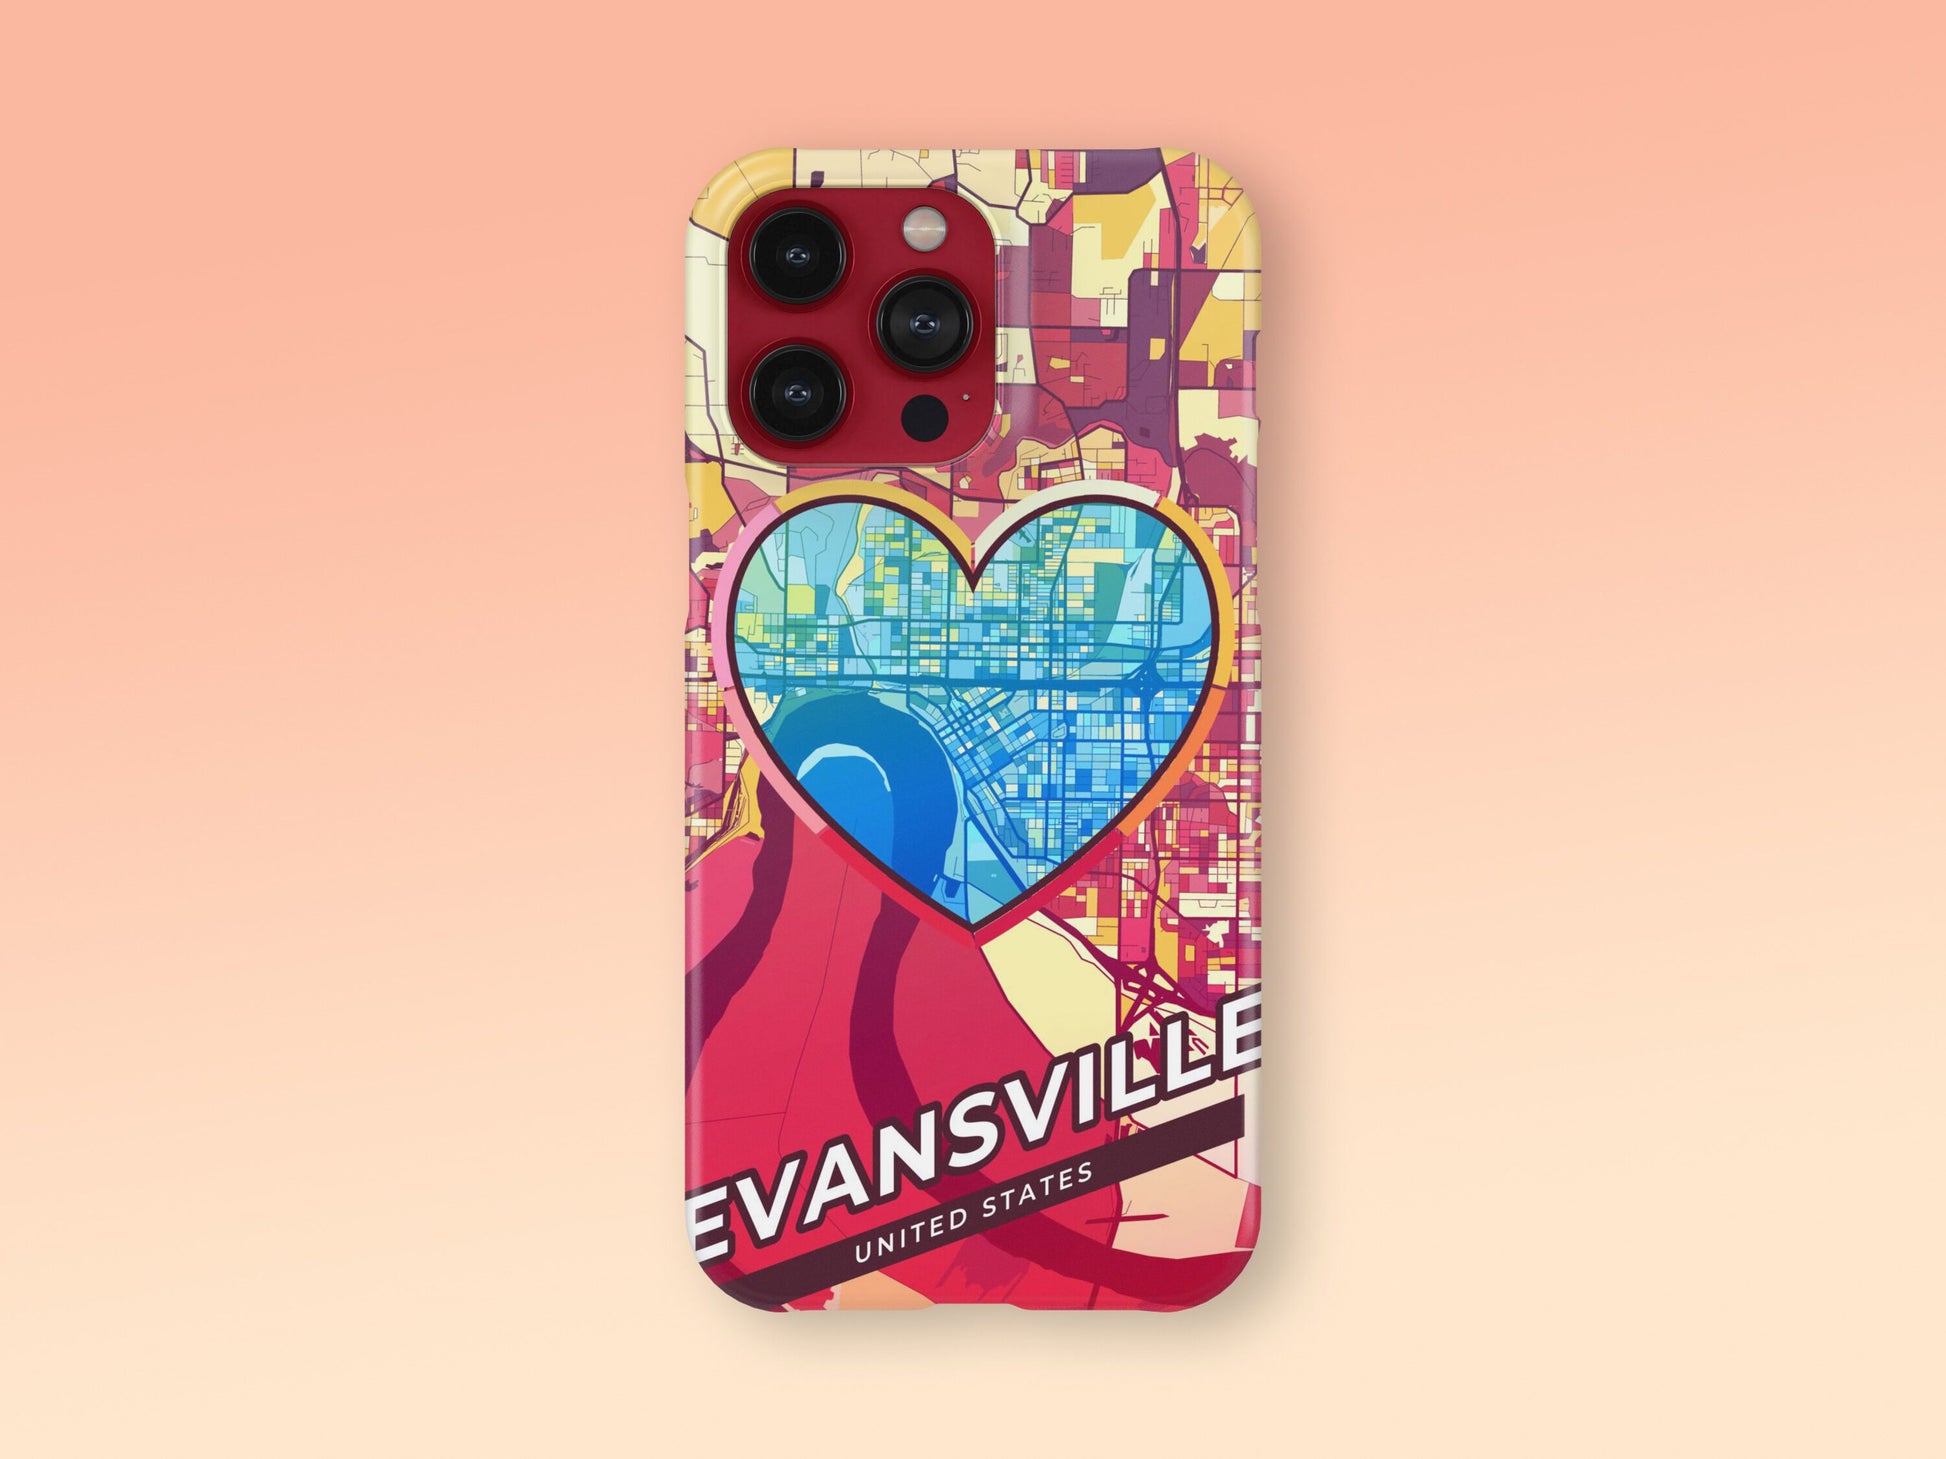 Evansville Indiana slim phone case with colorful icon. Birthday, wedding or housewarming gift. Couple match cases. 2